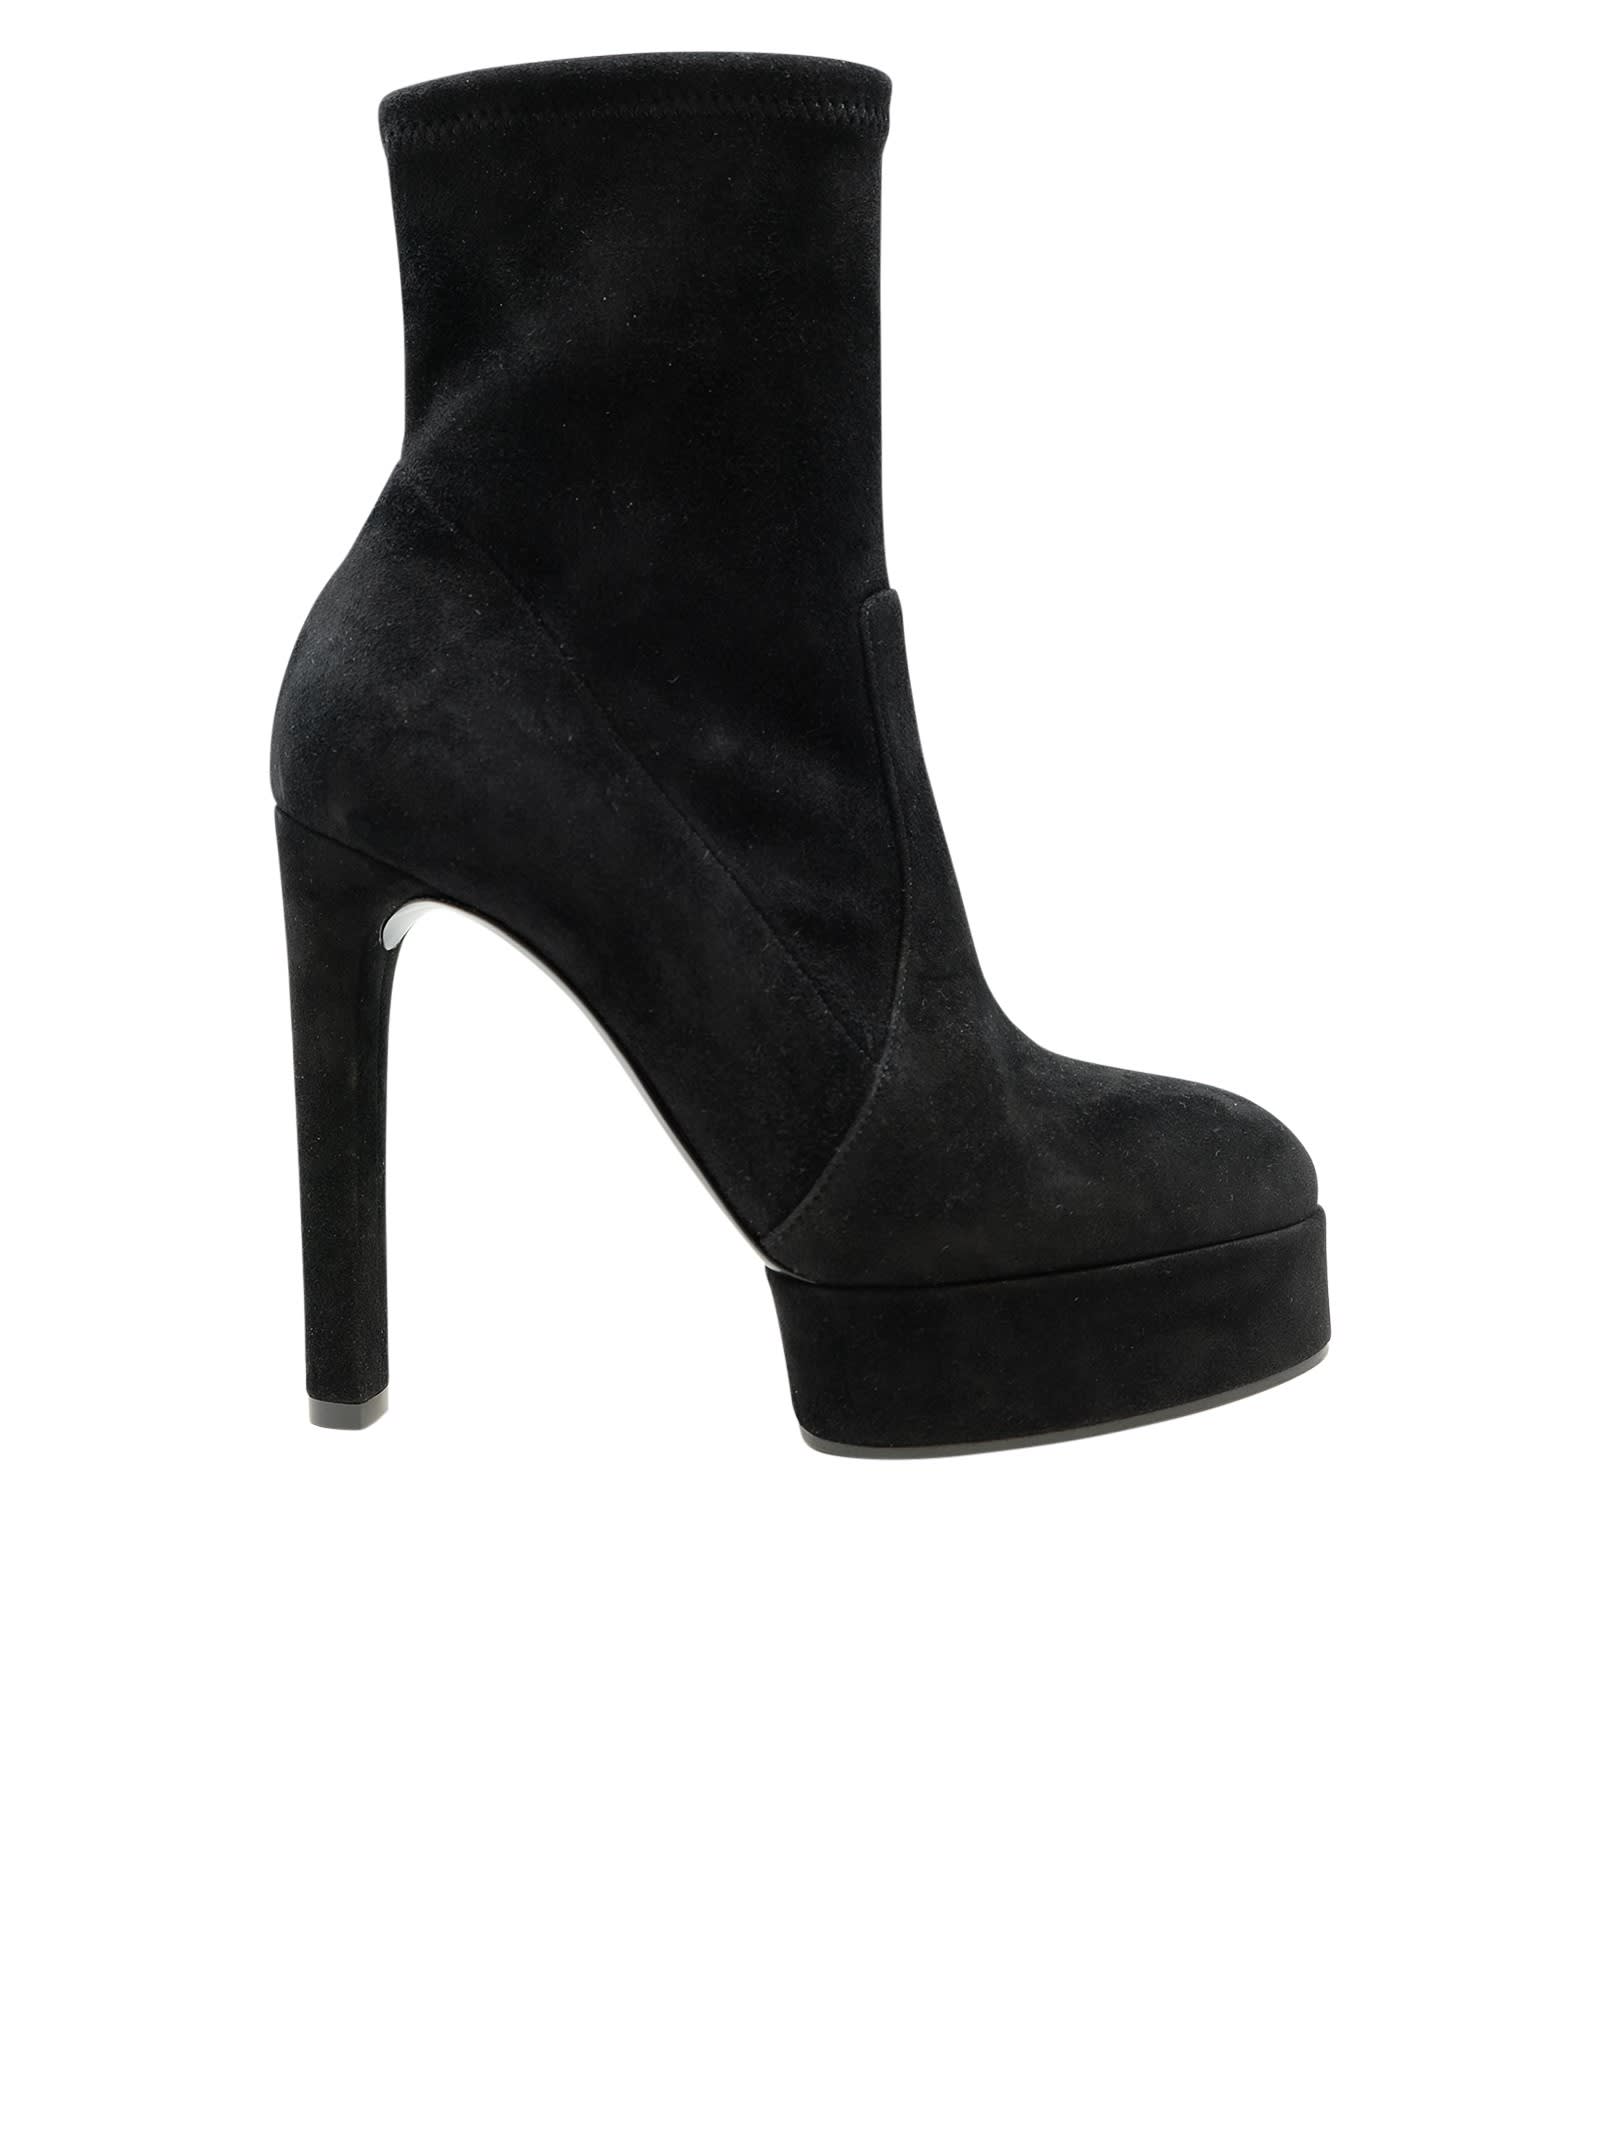 Casadei Black Suede Malleolo Ankle Boots